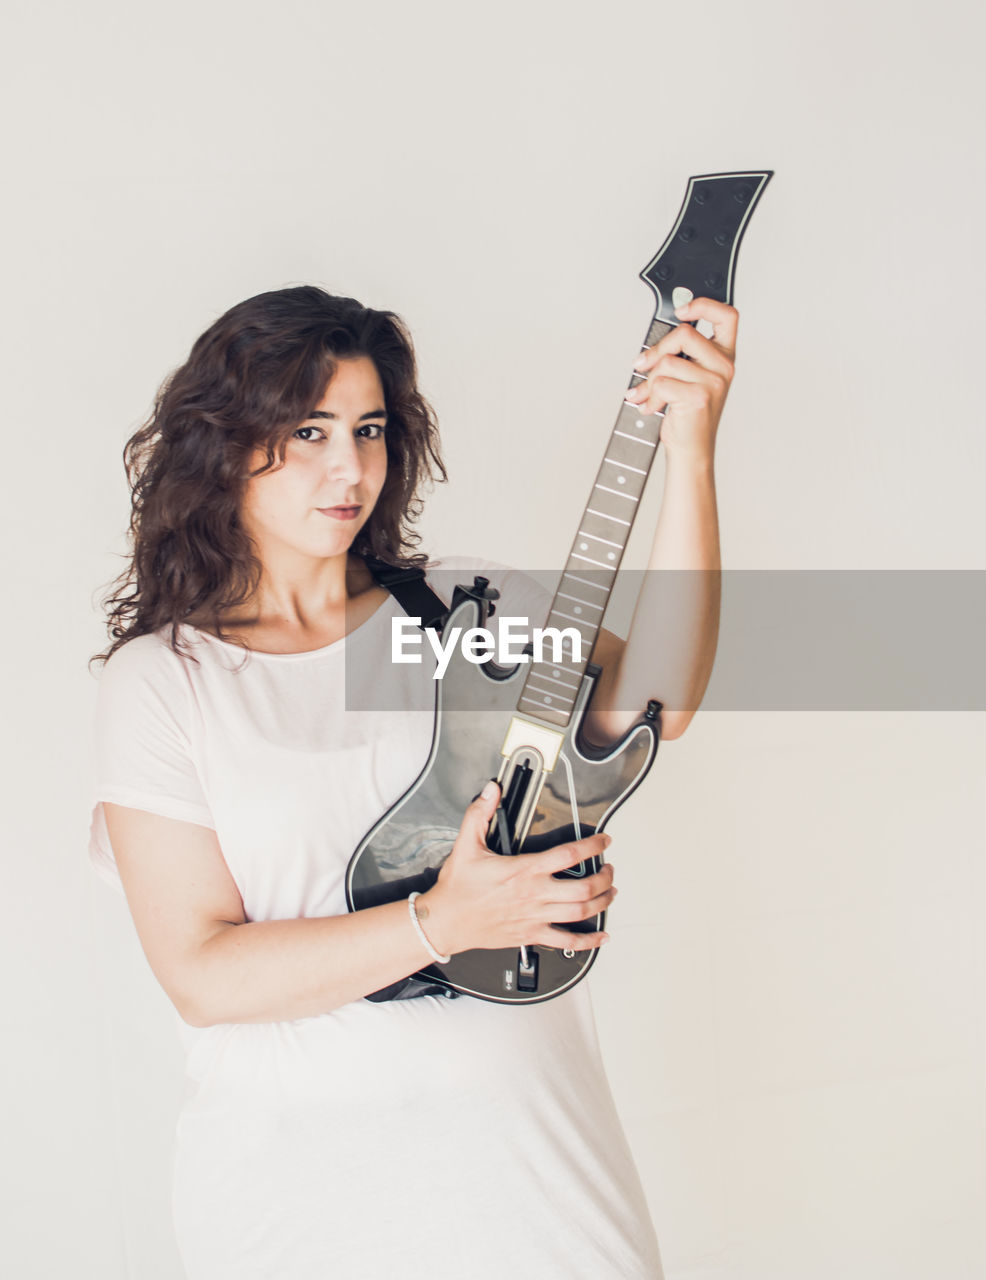 Portrait of beautiful woman holding guitar against white background